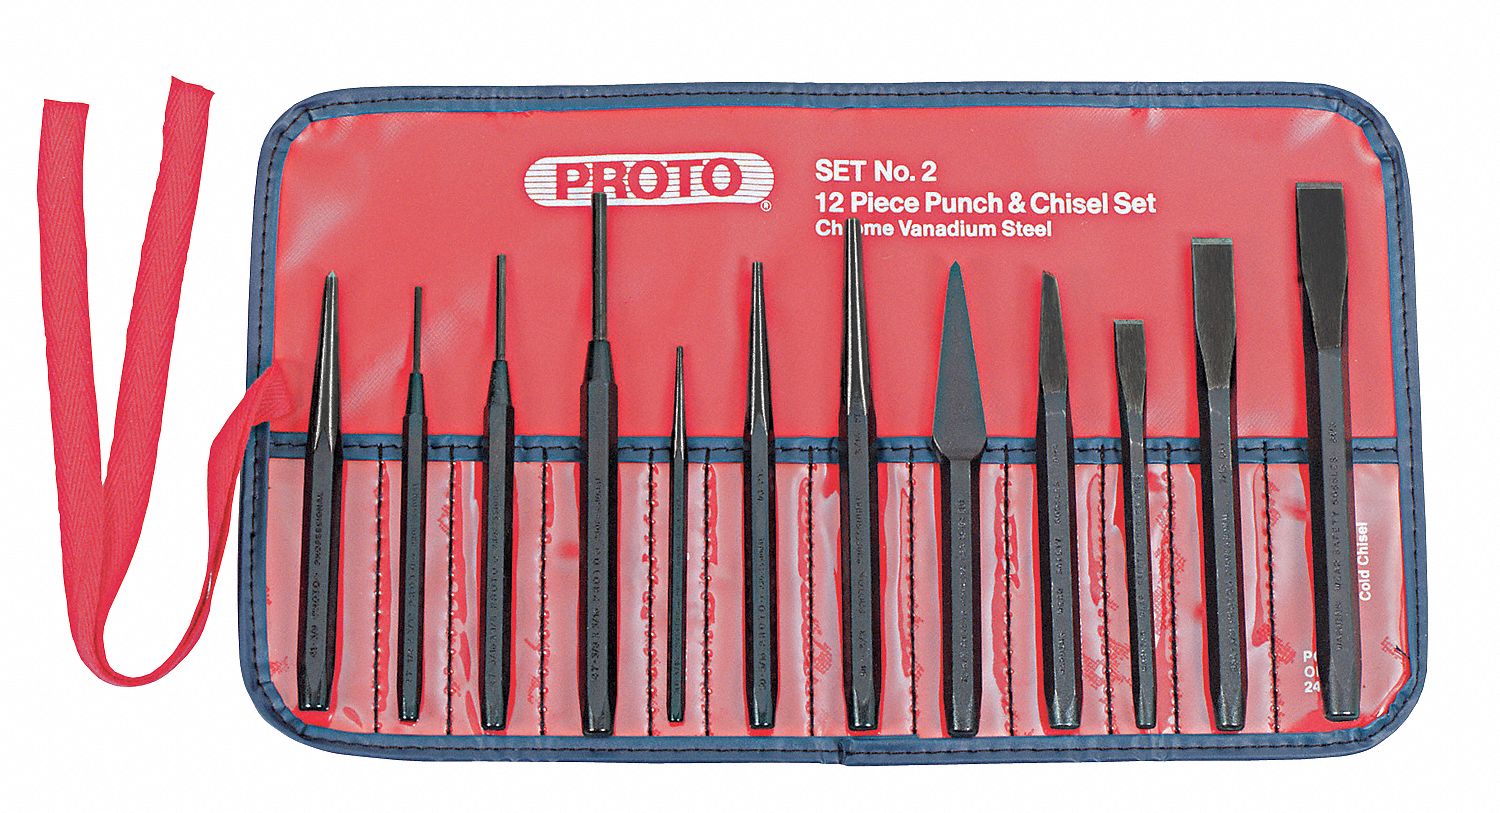 6Pcs Cold Chisel and Center Punch Set Solid Pin Punch Kit Masonry Plow Bit Y6M9 